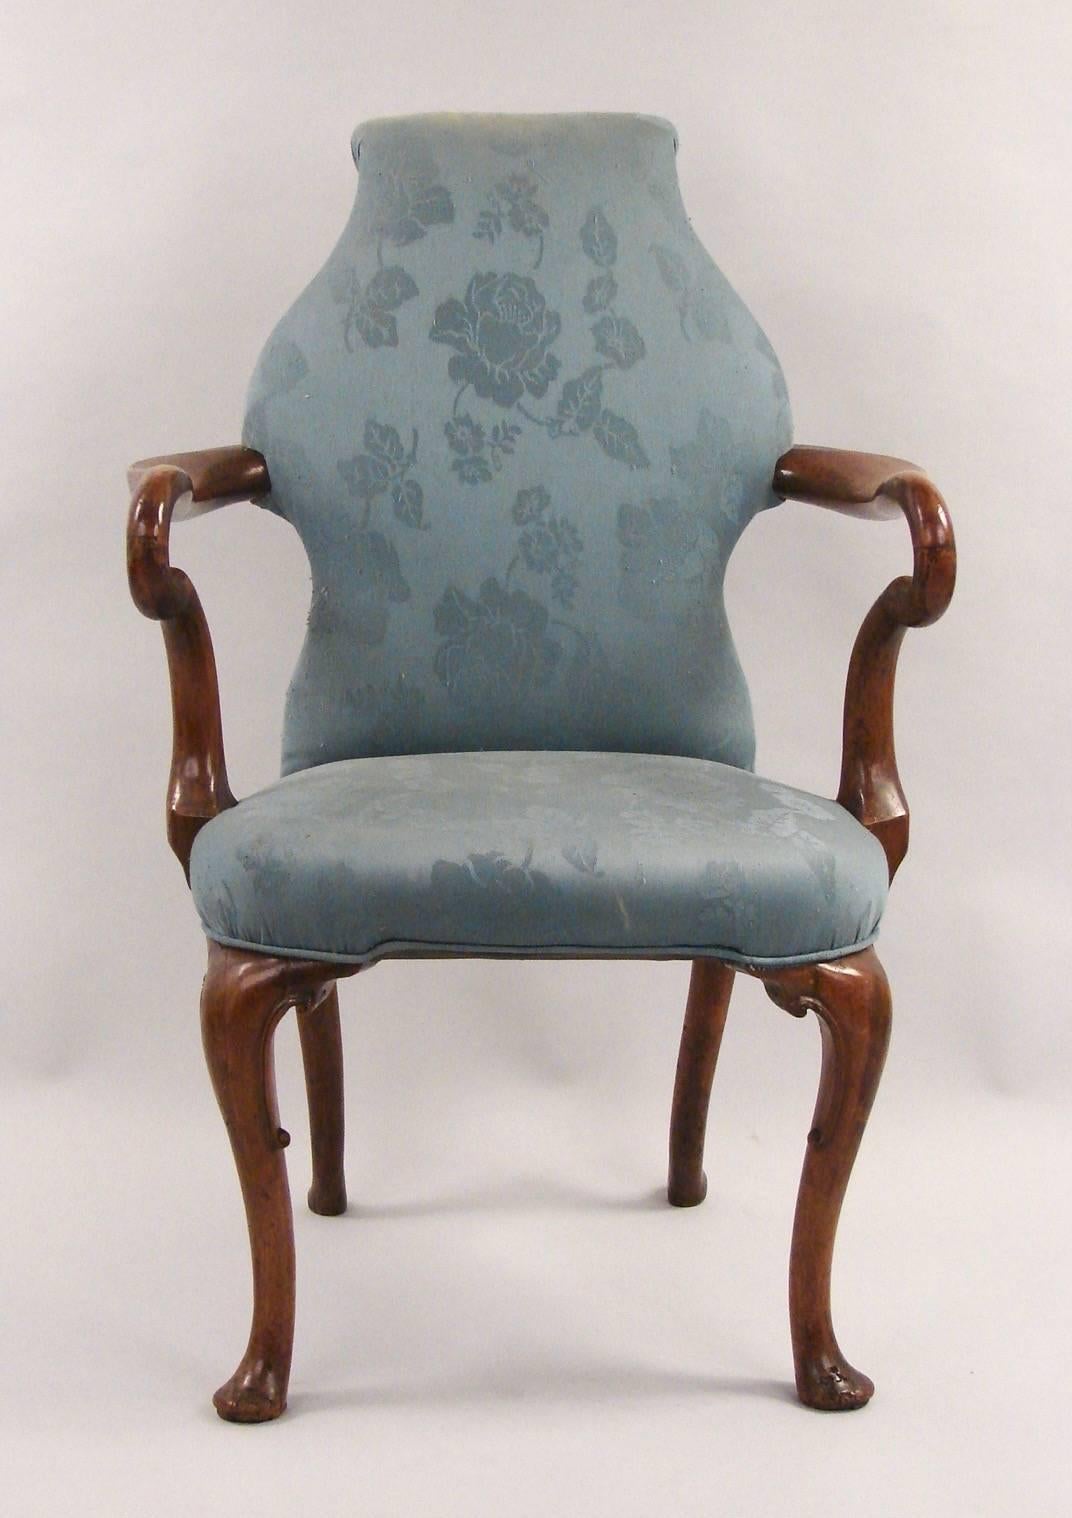 A pair of English George II style walnut armchairs upholstered in blue damask, the shaped back with a scrolled top supporting shepherd's crook arms terminating in a curved seat supported on cabriole legs ending in pad feet.